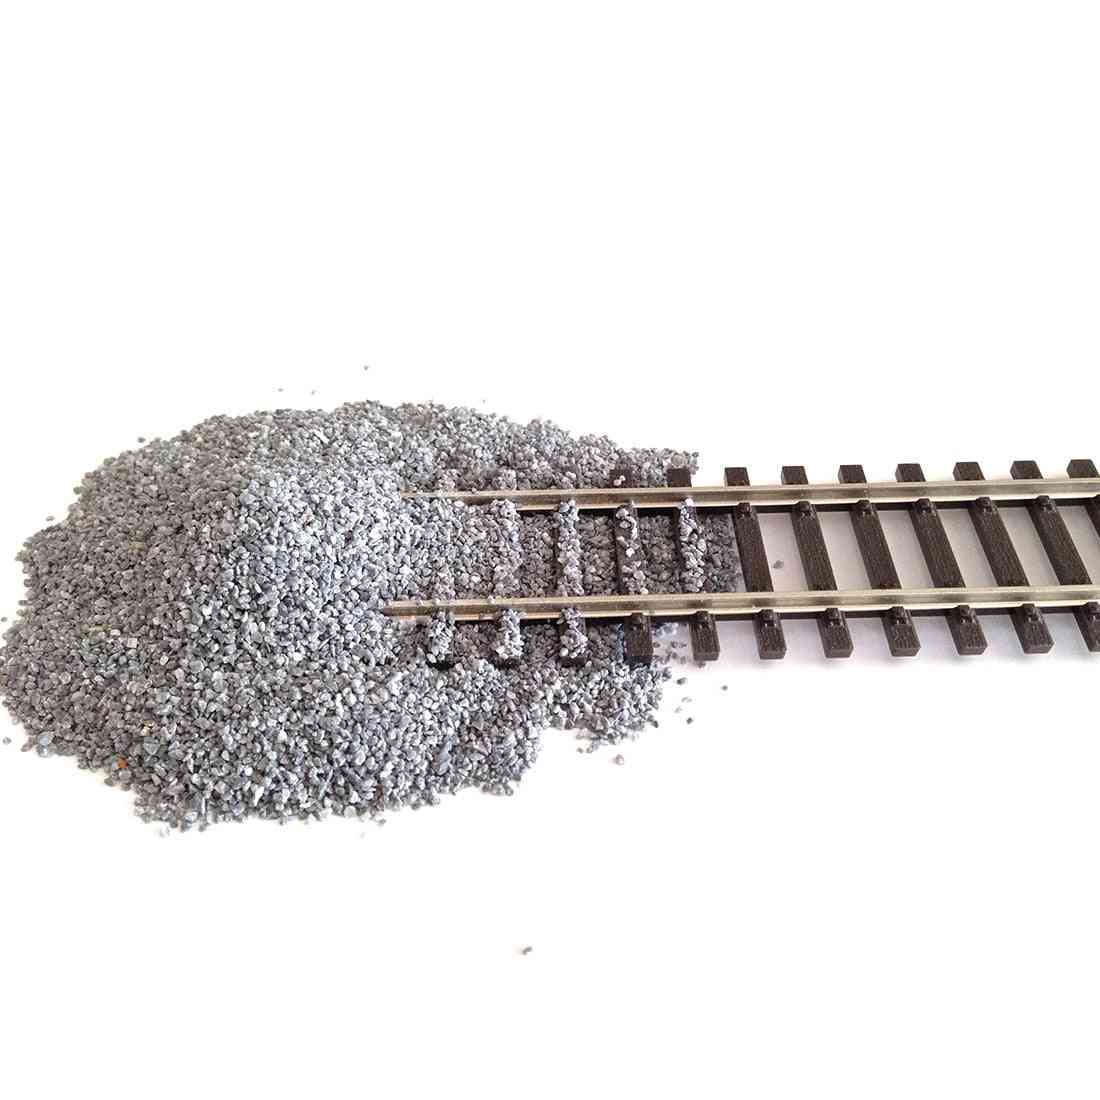 450g Ho 1:87/n 1:160 Train Model Layout Sand Ballast - Brown (no Railroad Tracks And Other Buildings)